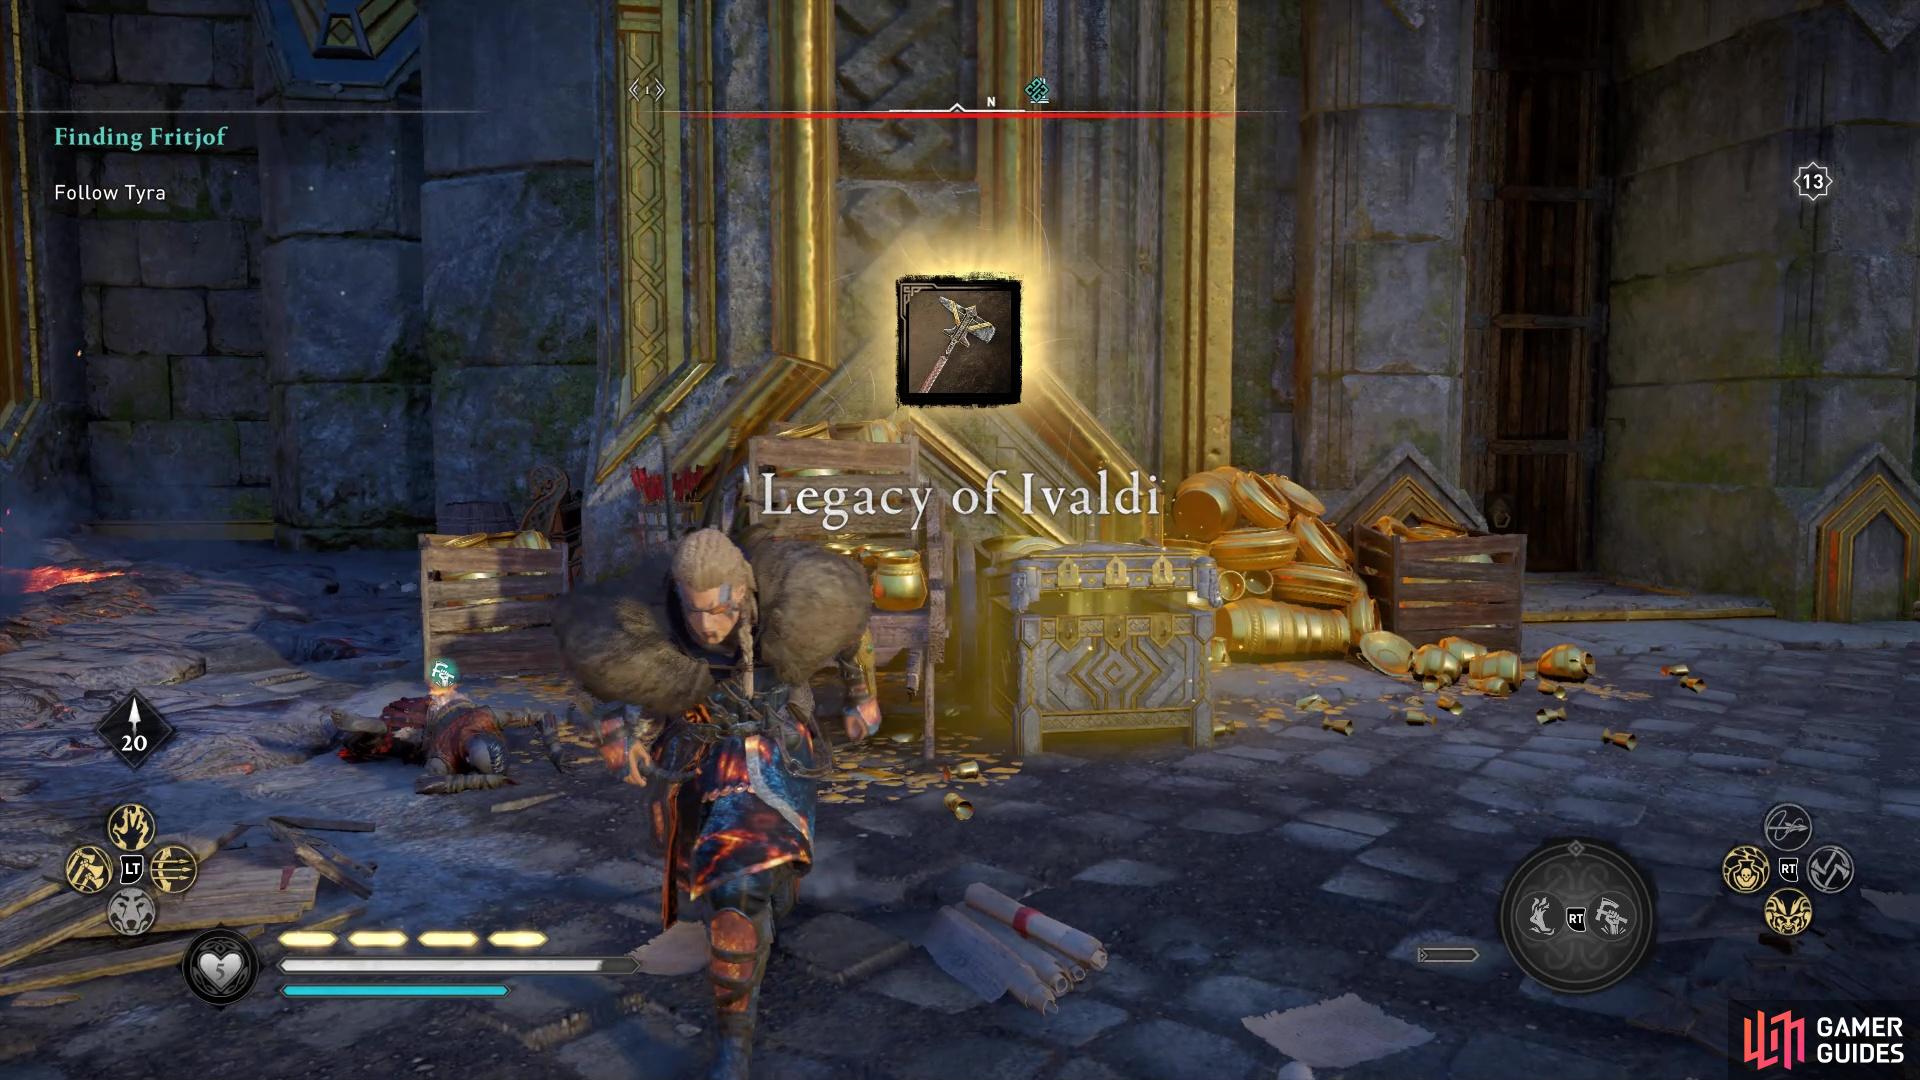 The Legacy of Ivaldi is the only weapon to collect in the region.